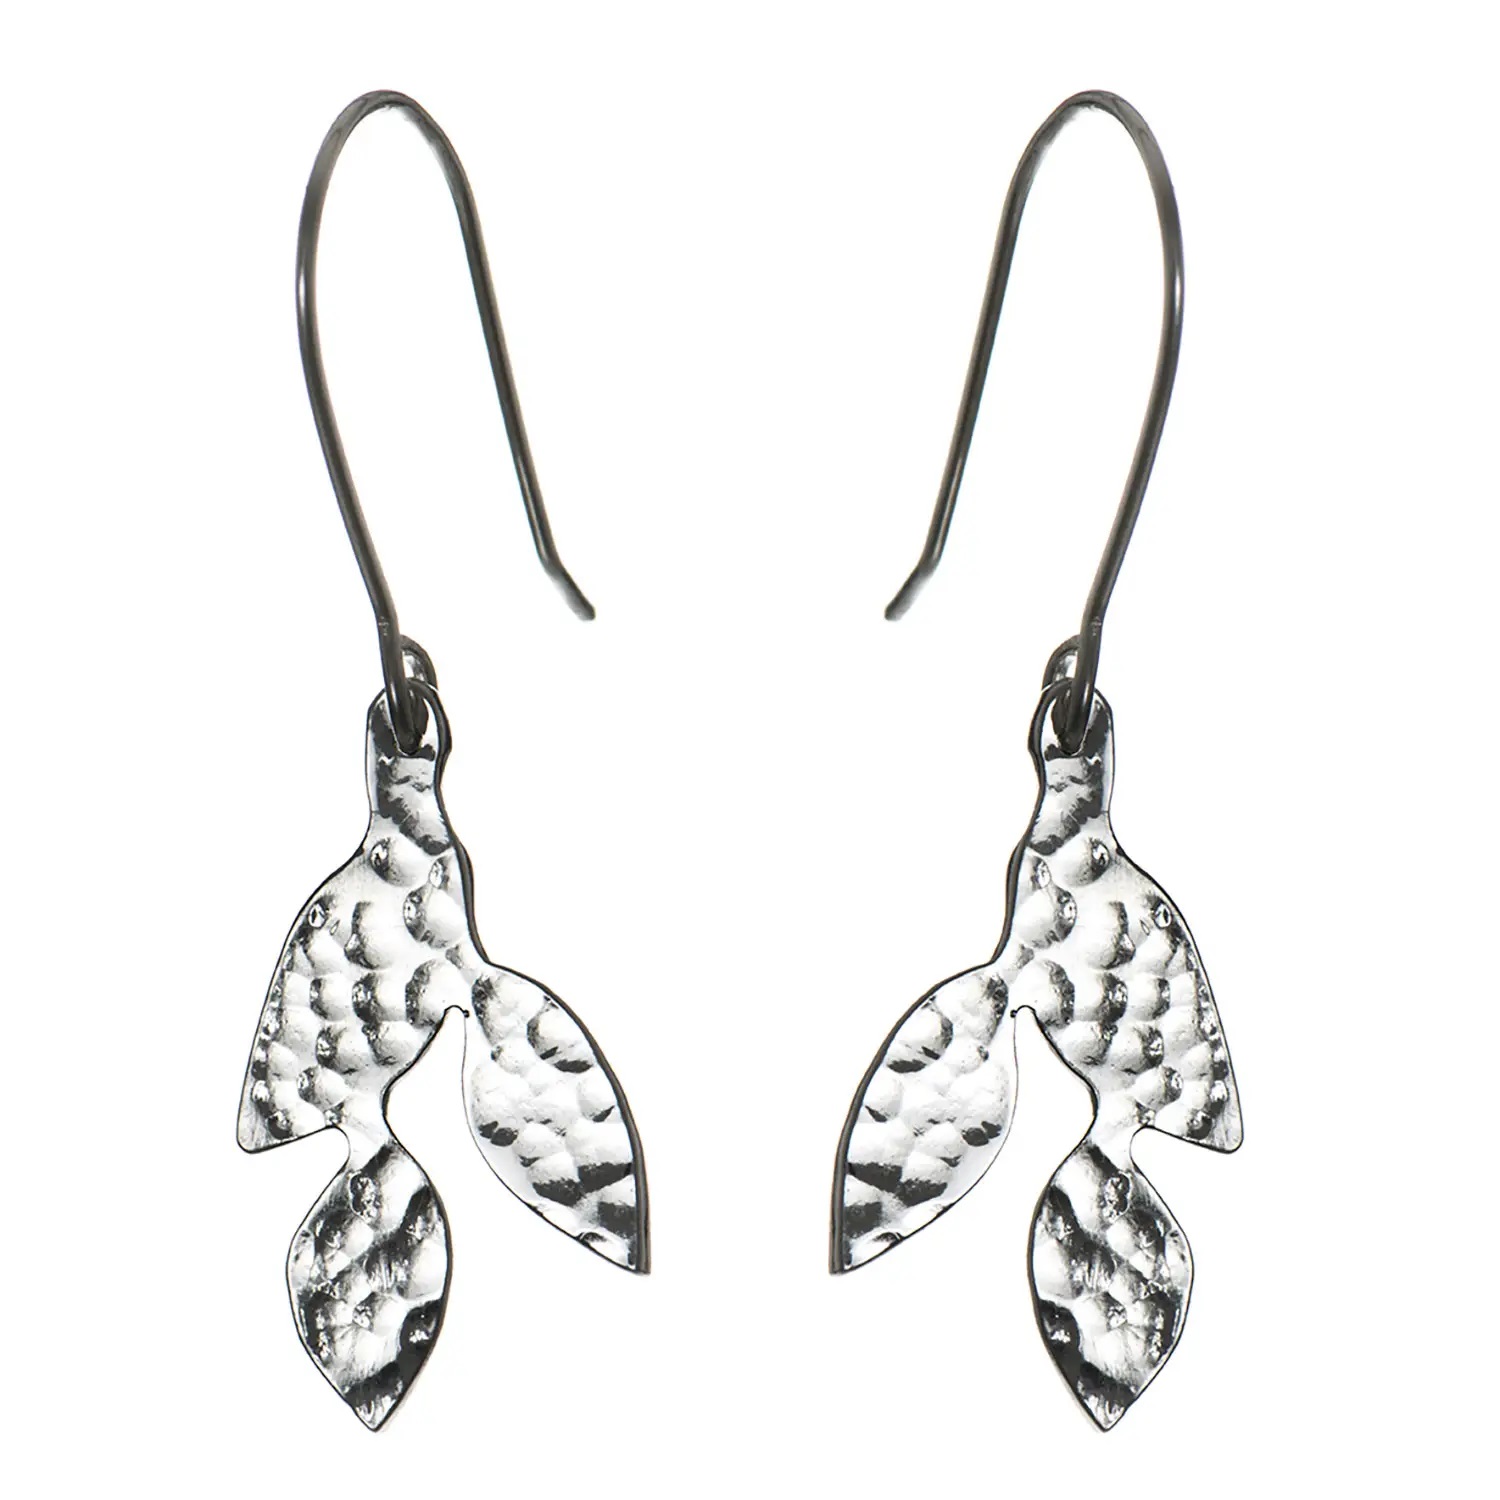 Just Trade  Silver Plated Small Leaf Earrings